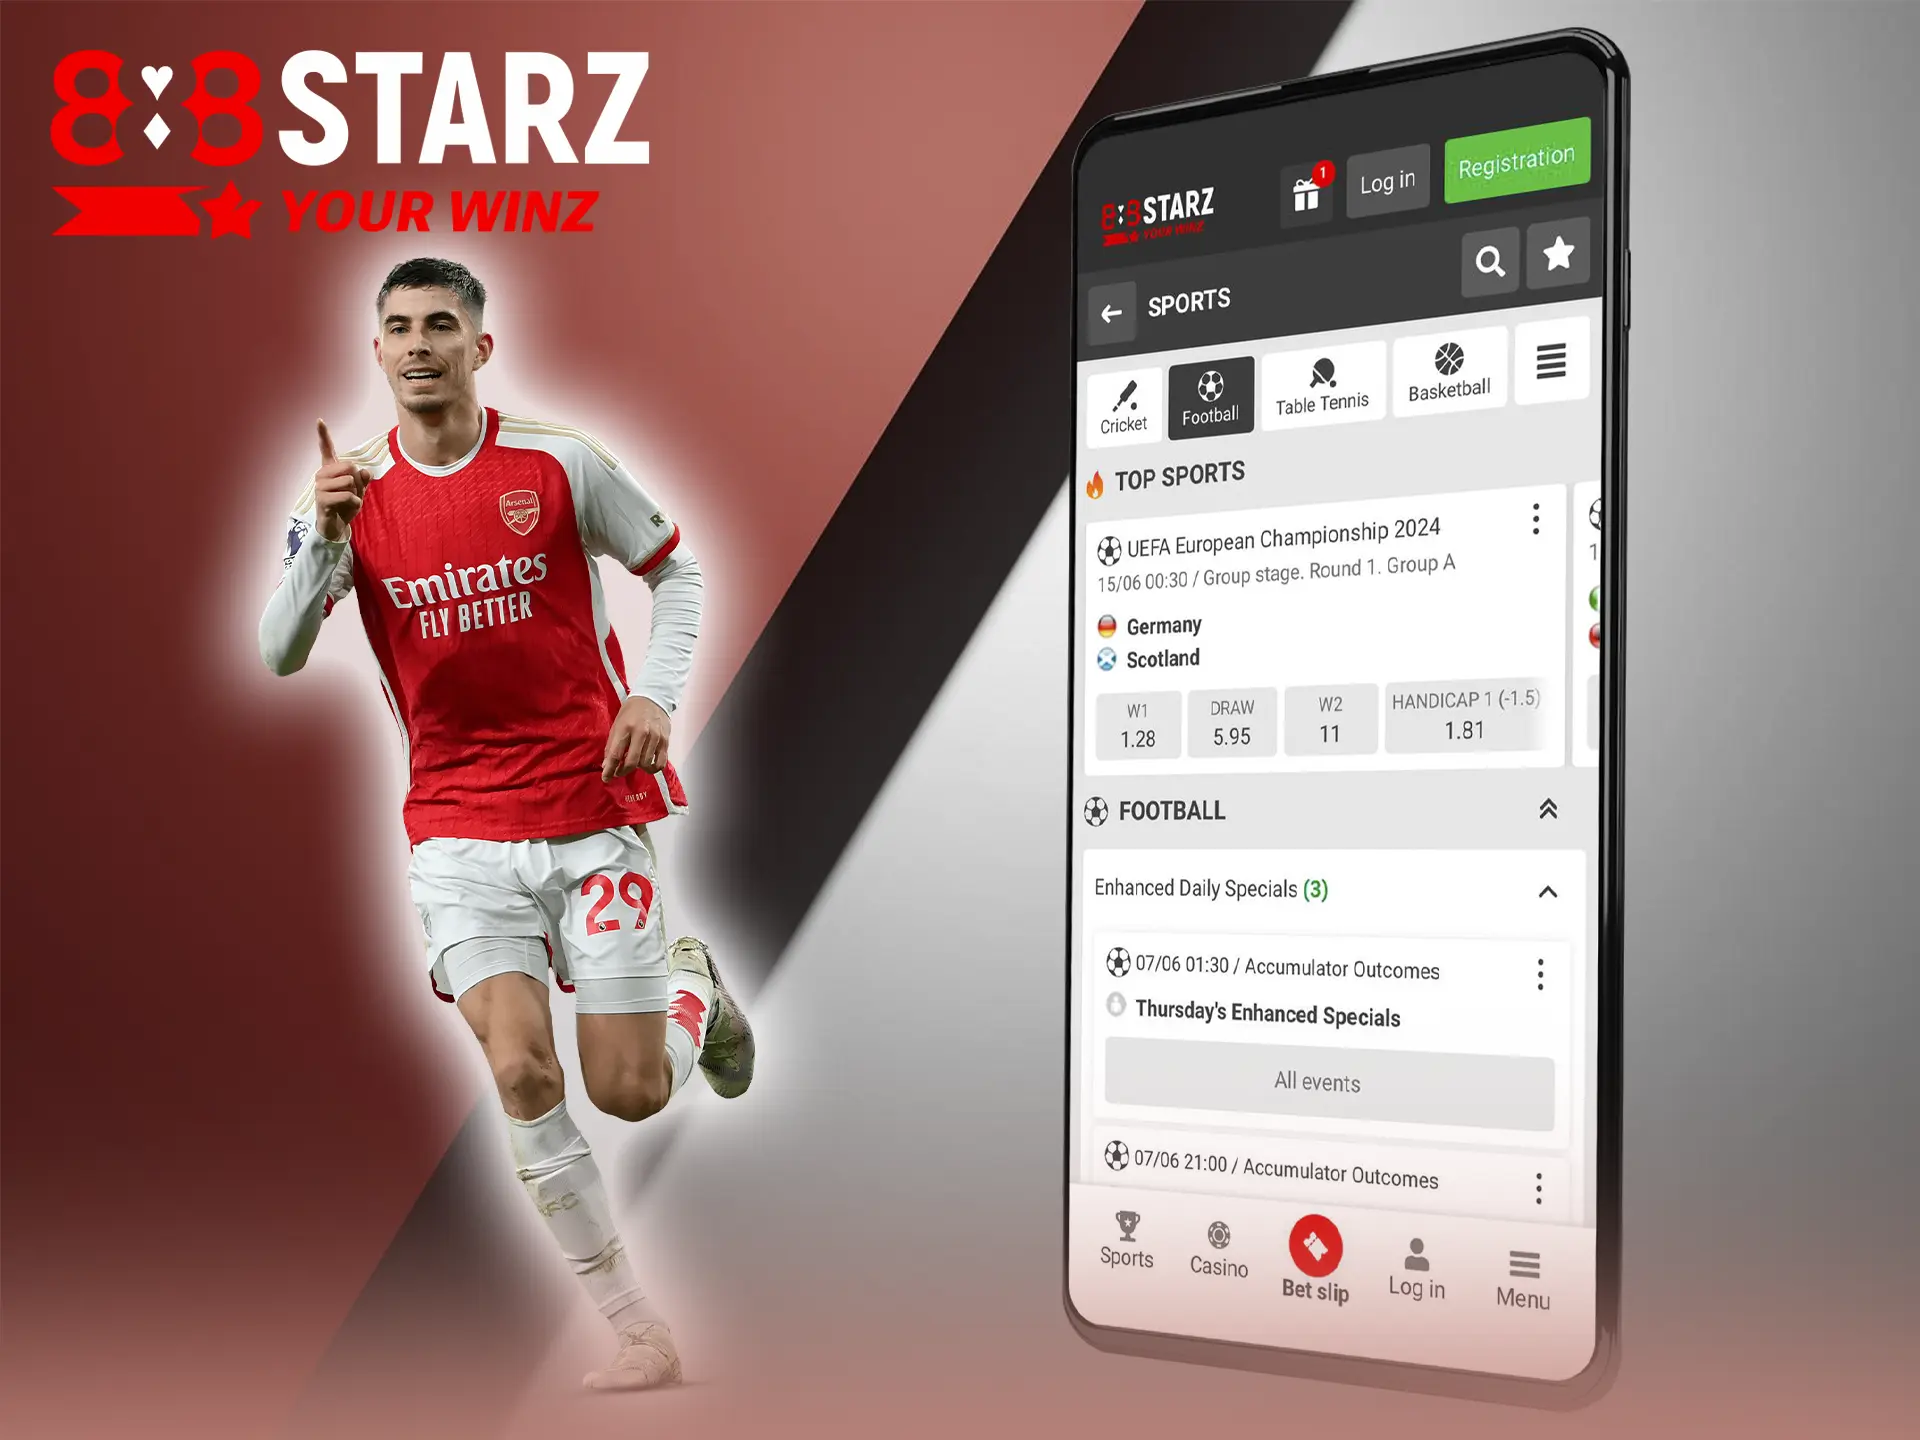 Watch matches and make your predictions on the innovative 888Starz app.